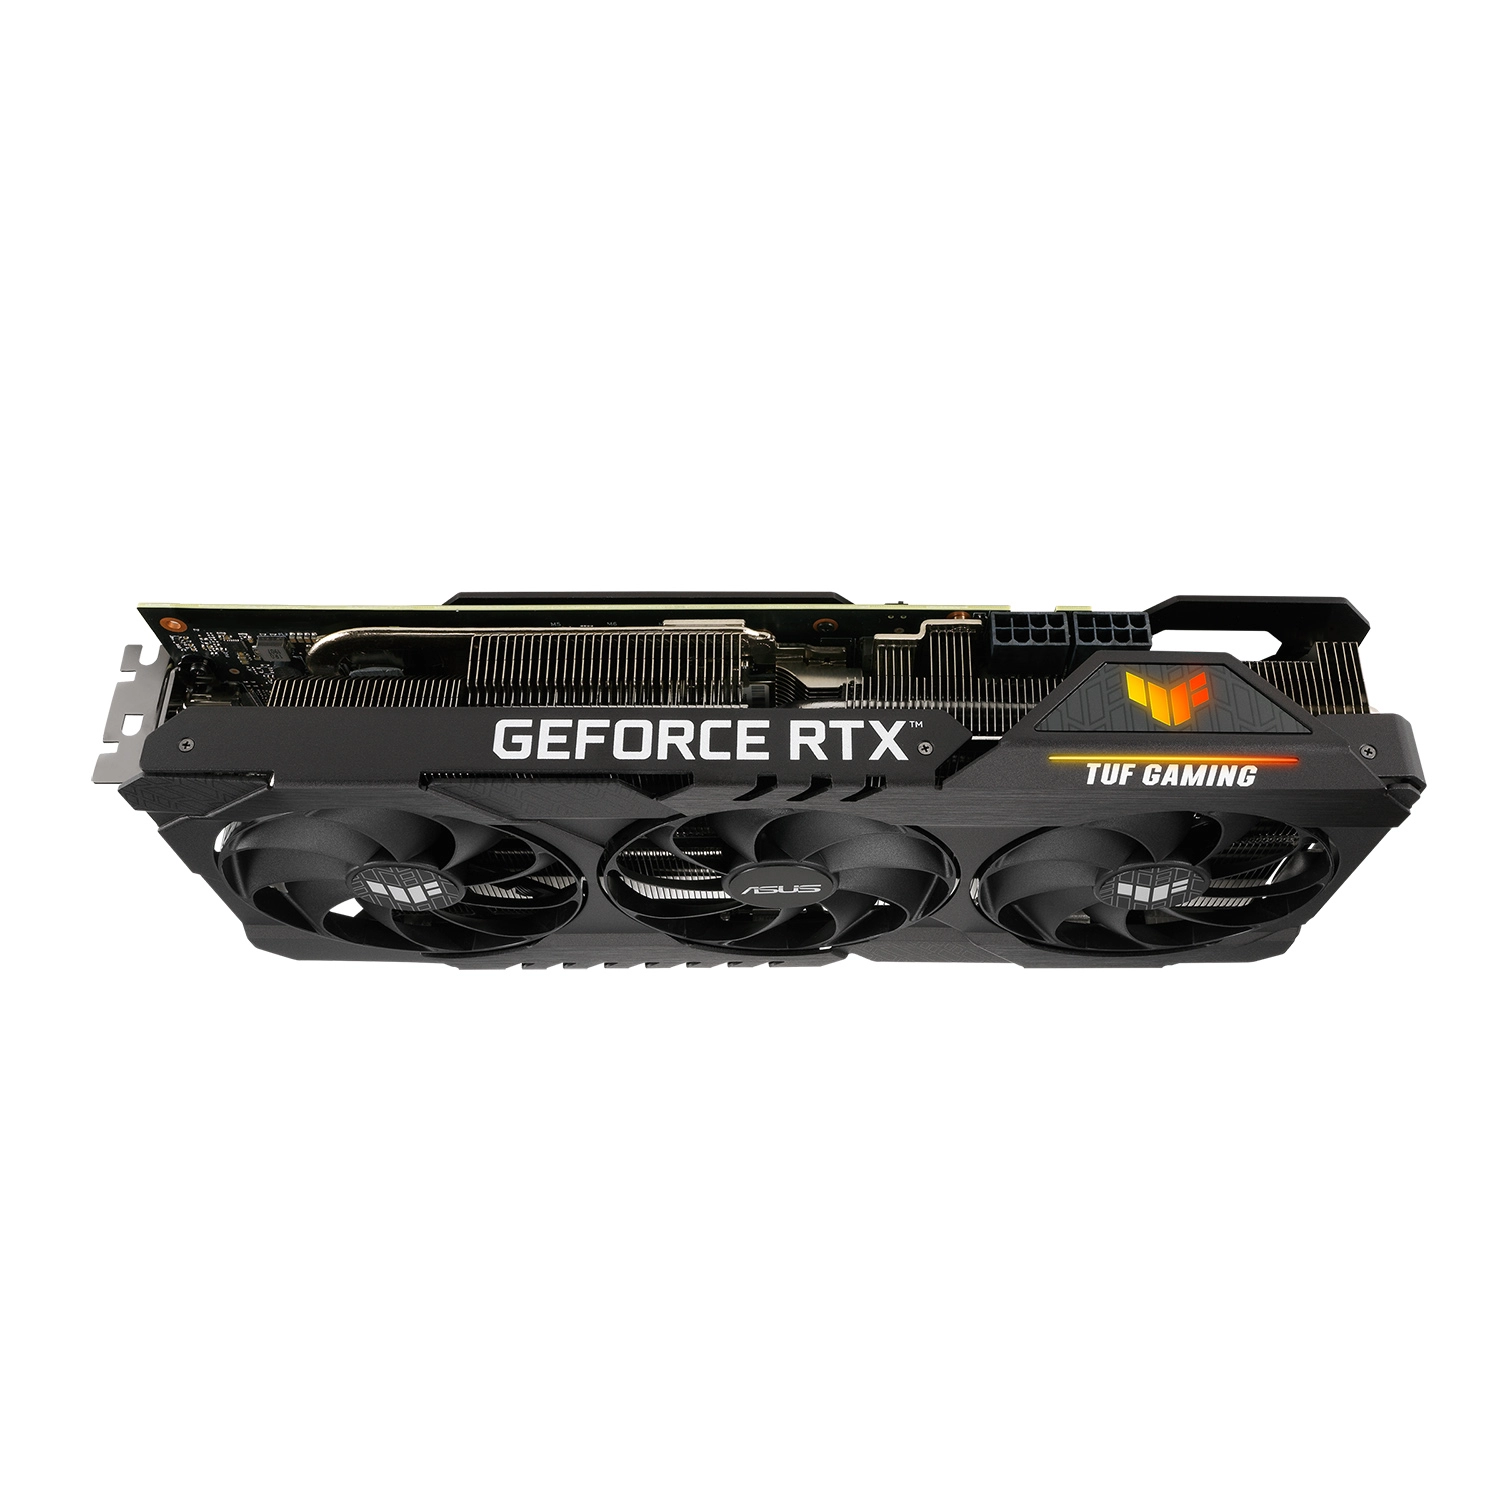 ASUS TUF Gaming GeForce RTX 3070 Ti OC Edition 8GB Front View